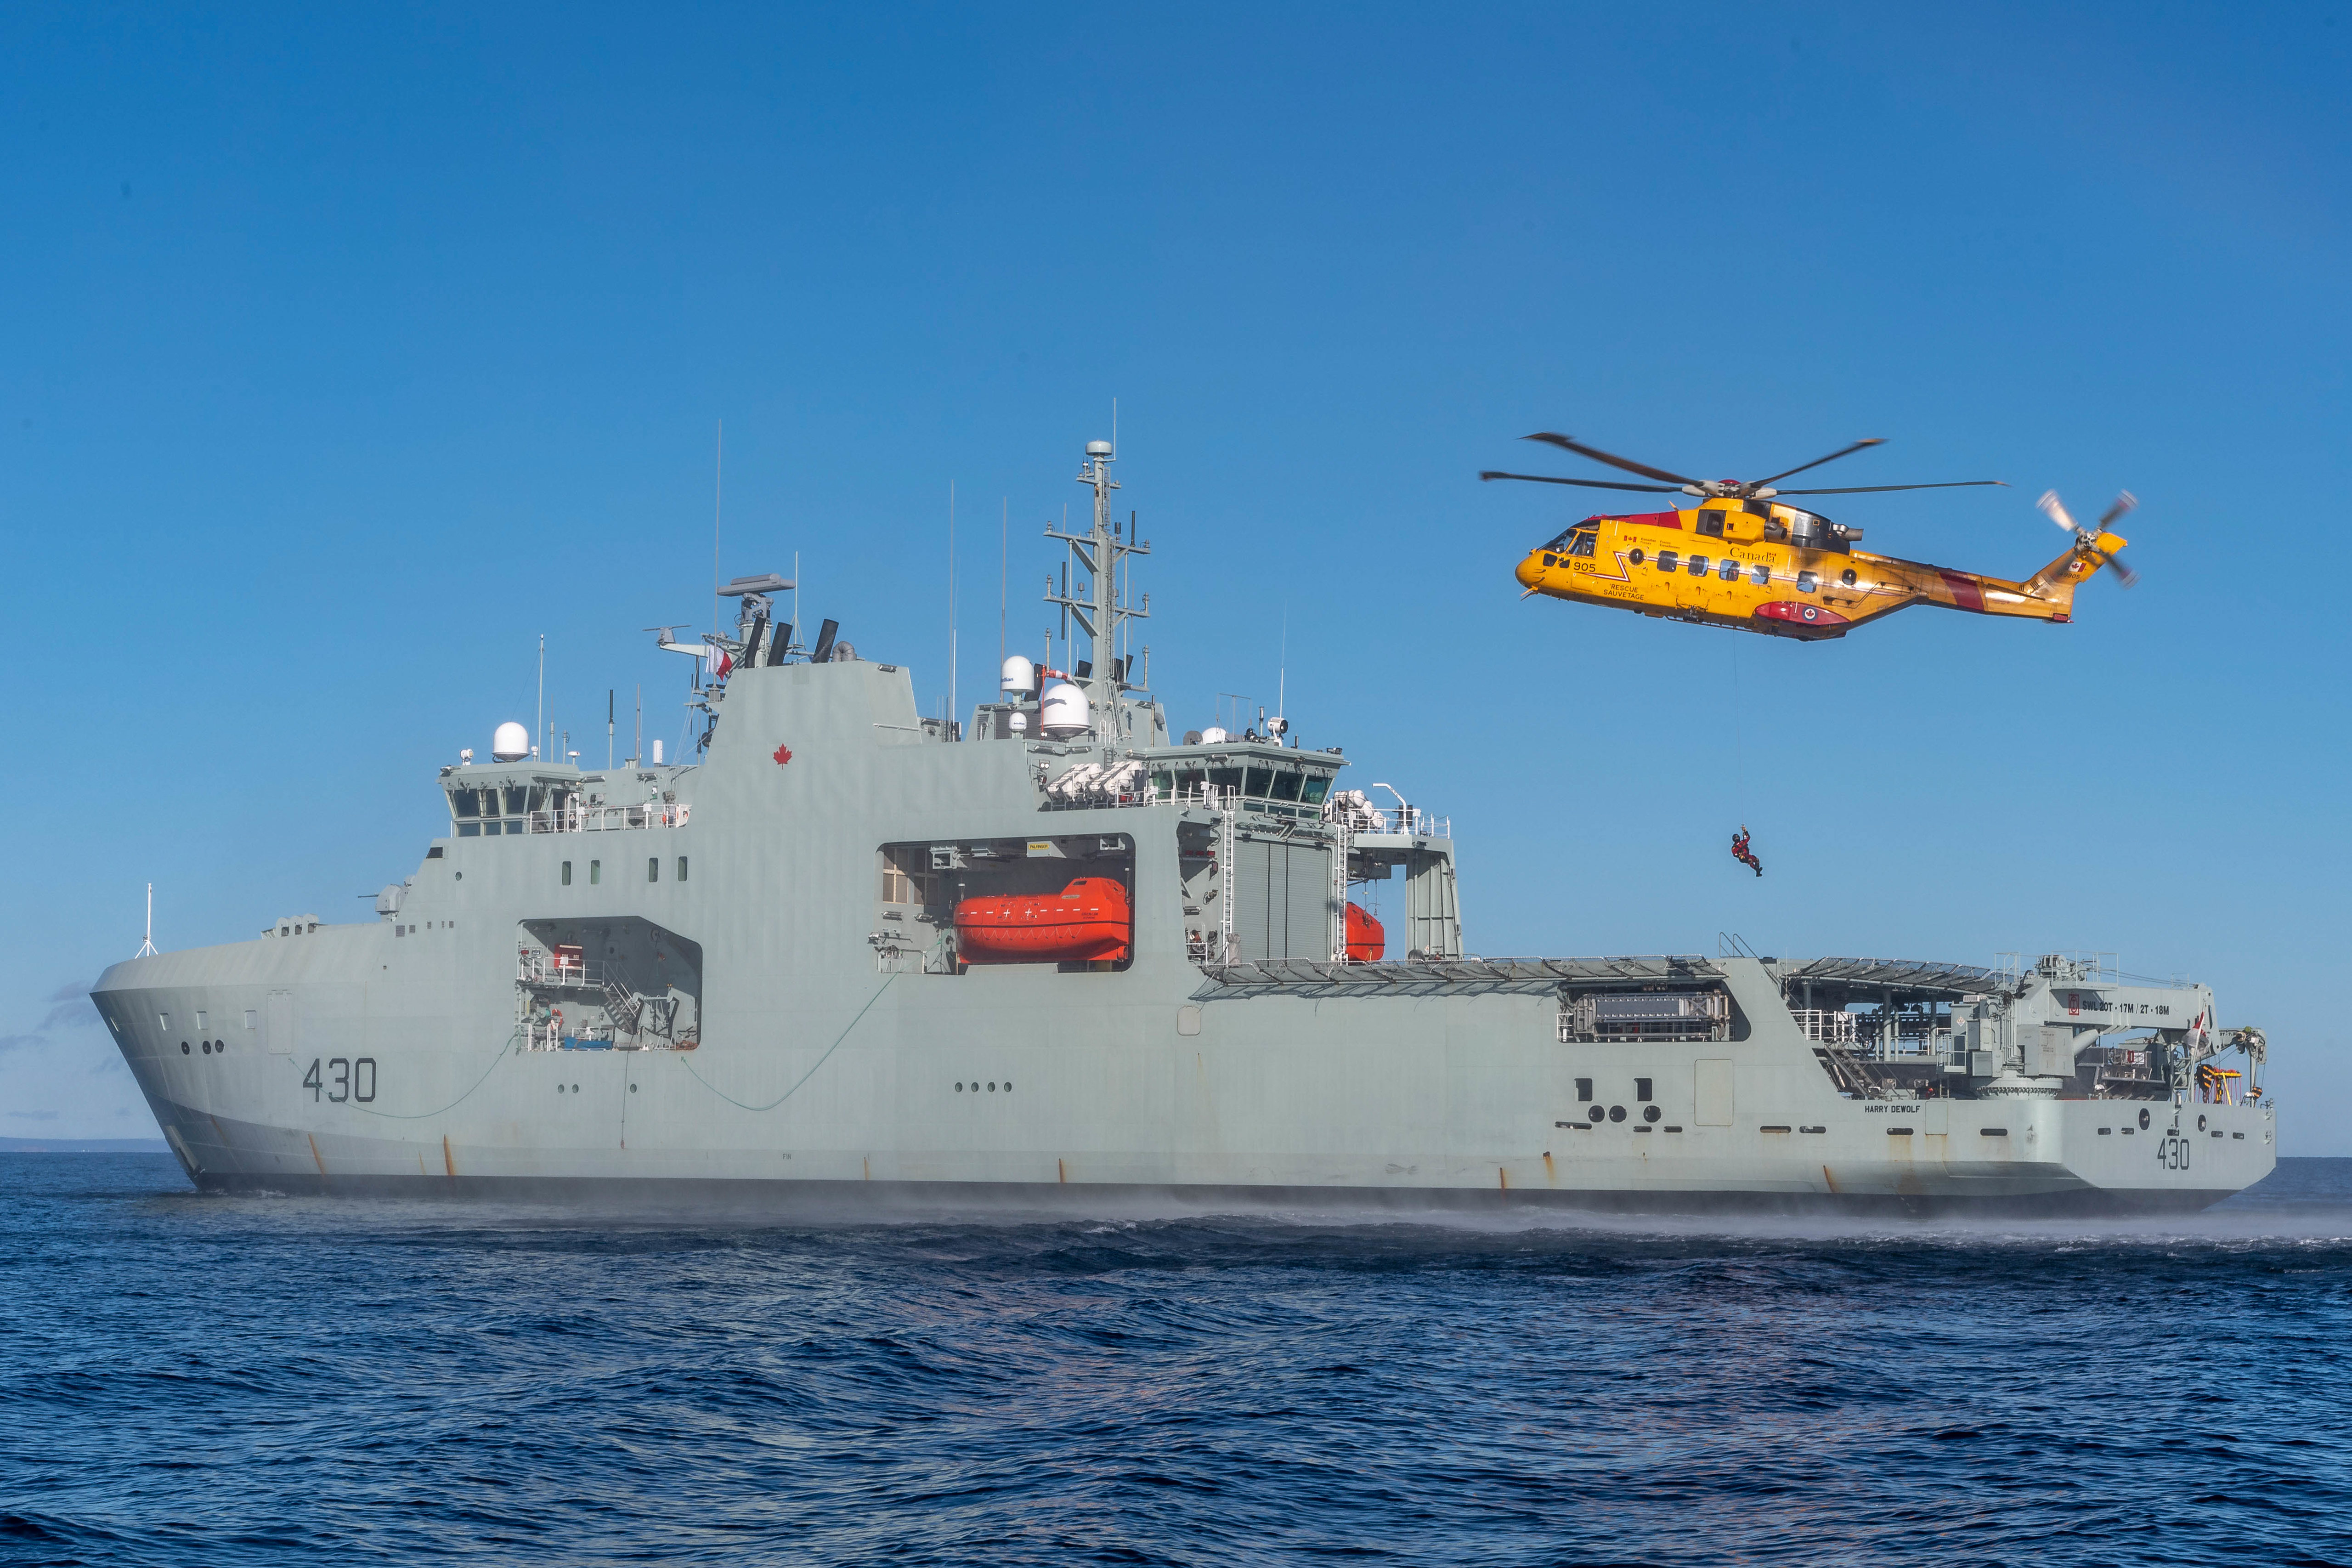 A CH-149 Cormorant helicopter lowers a Search and Rescue Technician aboard HMCS Harry DeWolf